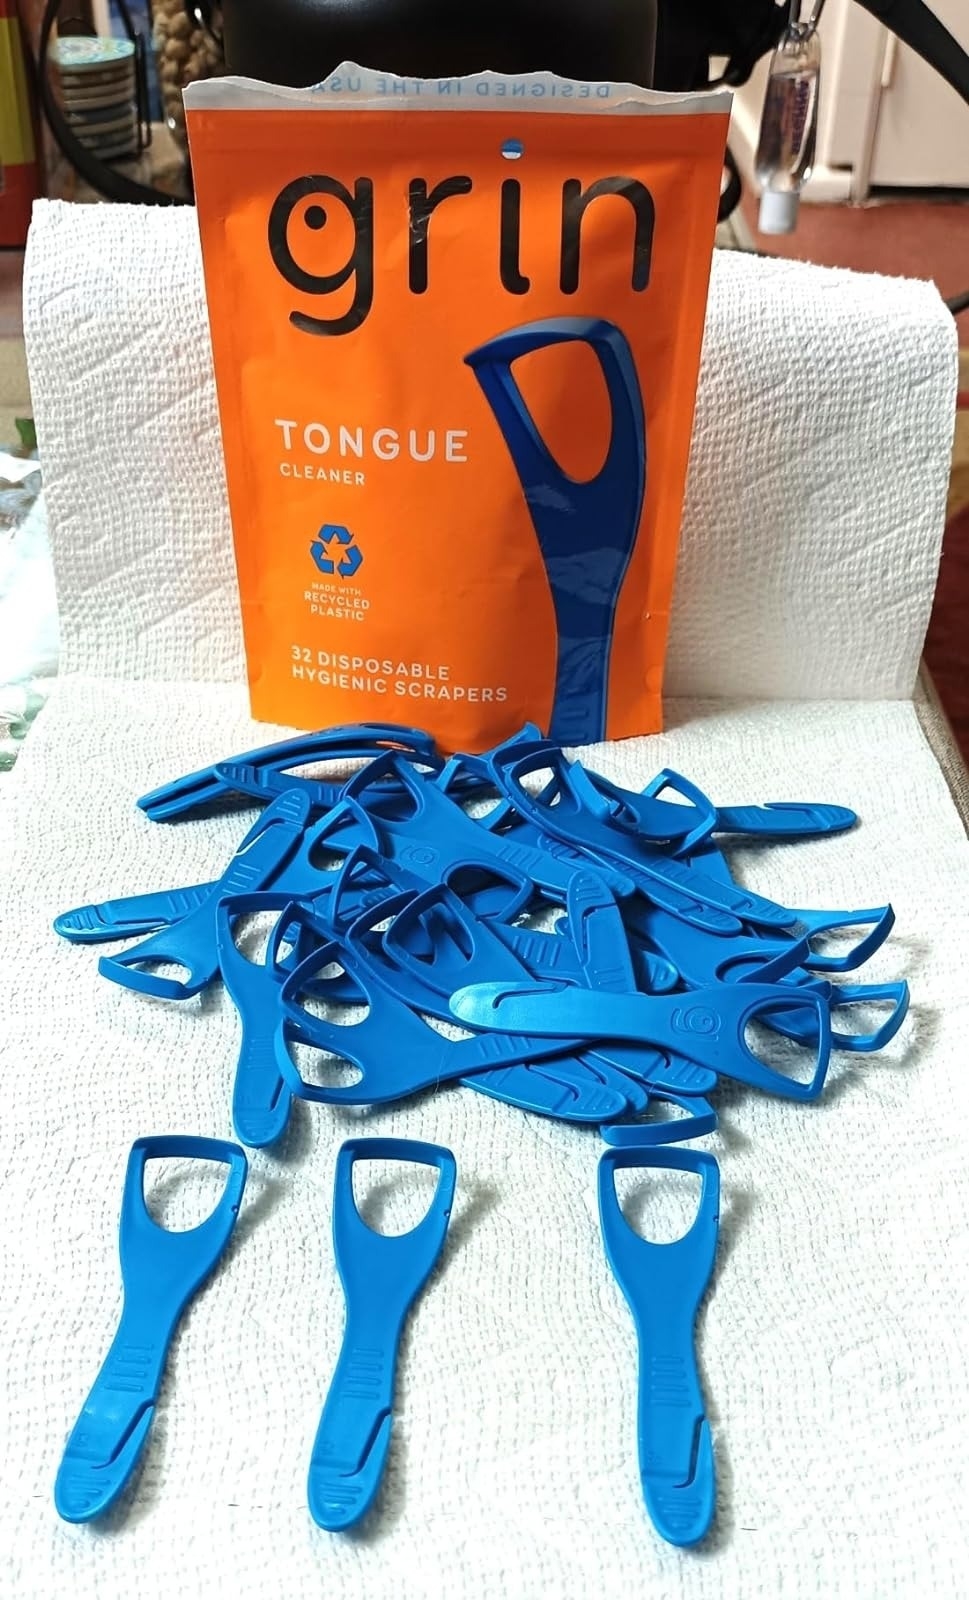 A pack of Grin tongue cleaners and several individual blue scrapers displayed on a surface